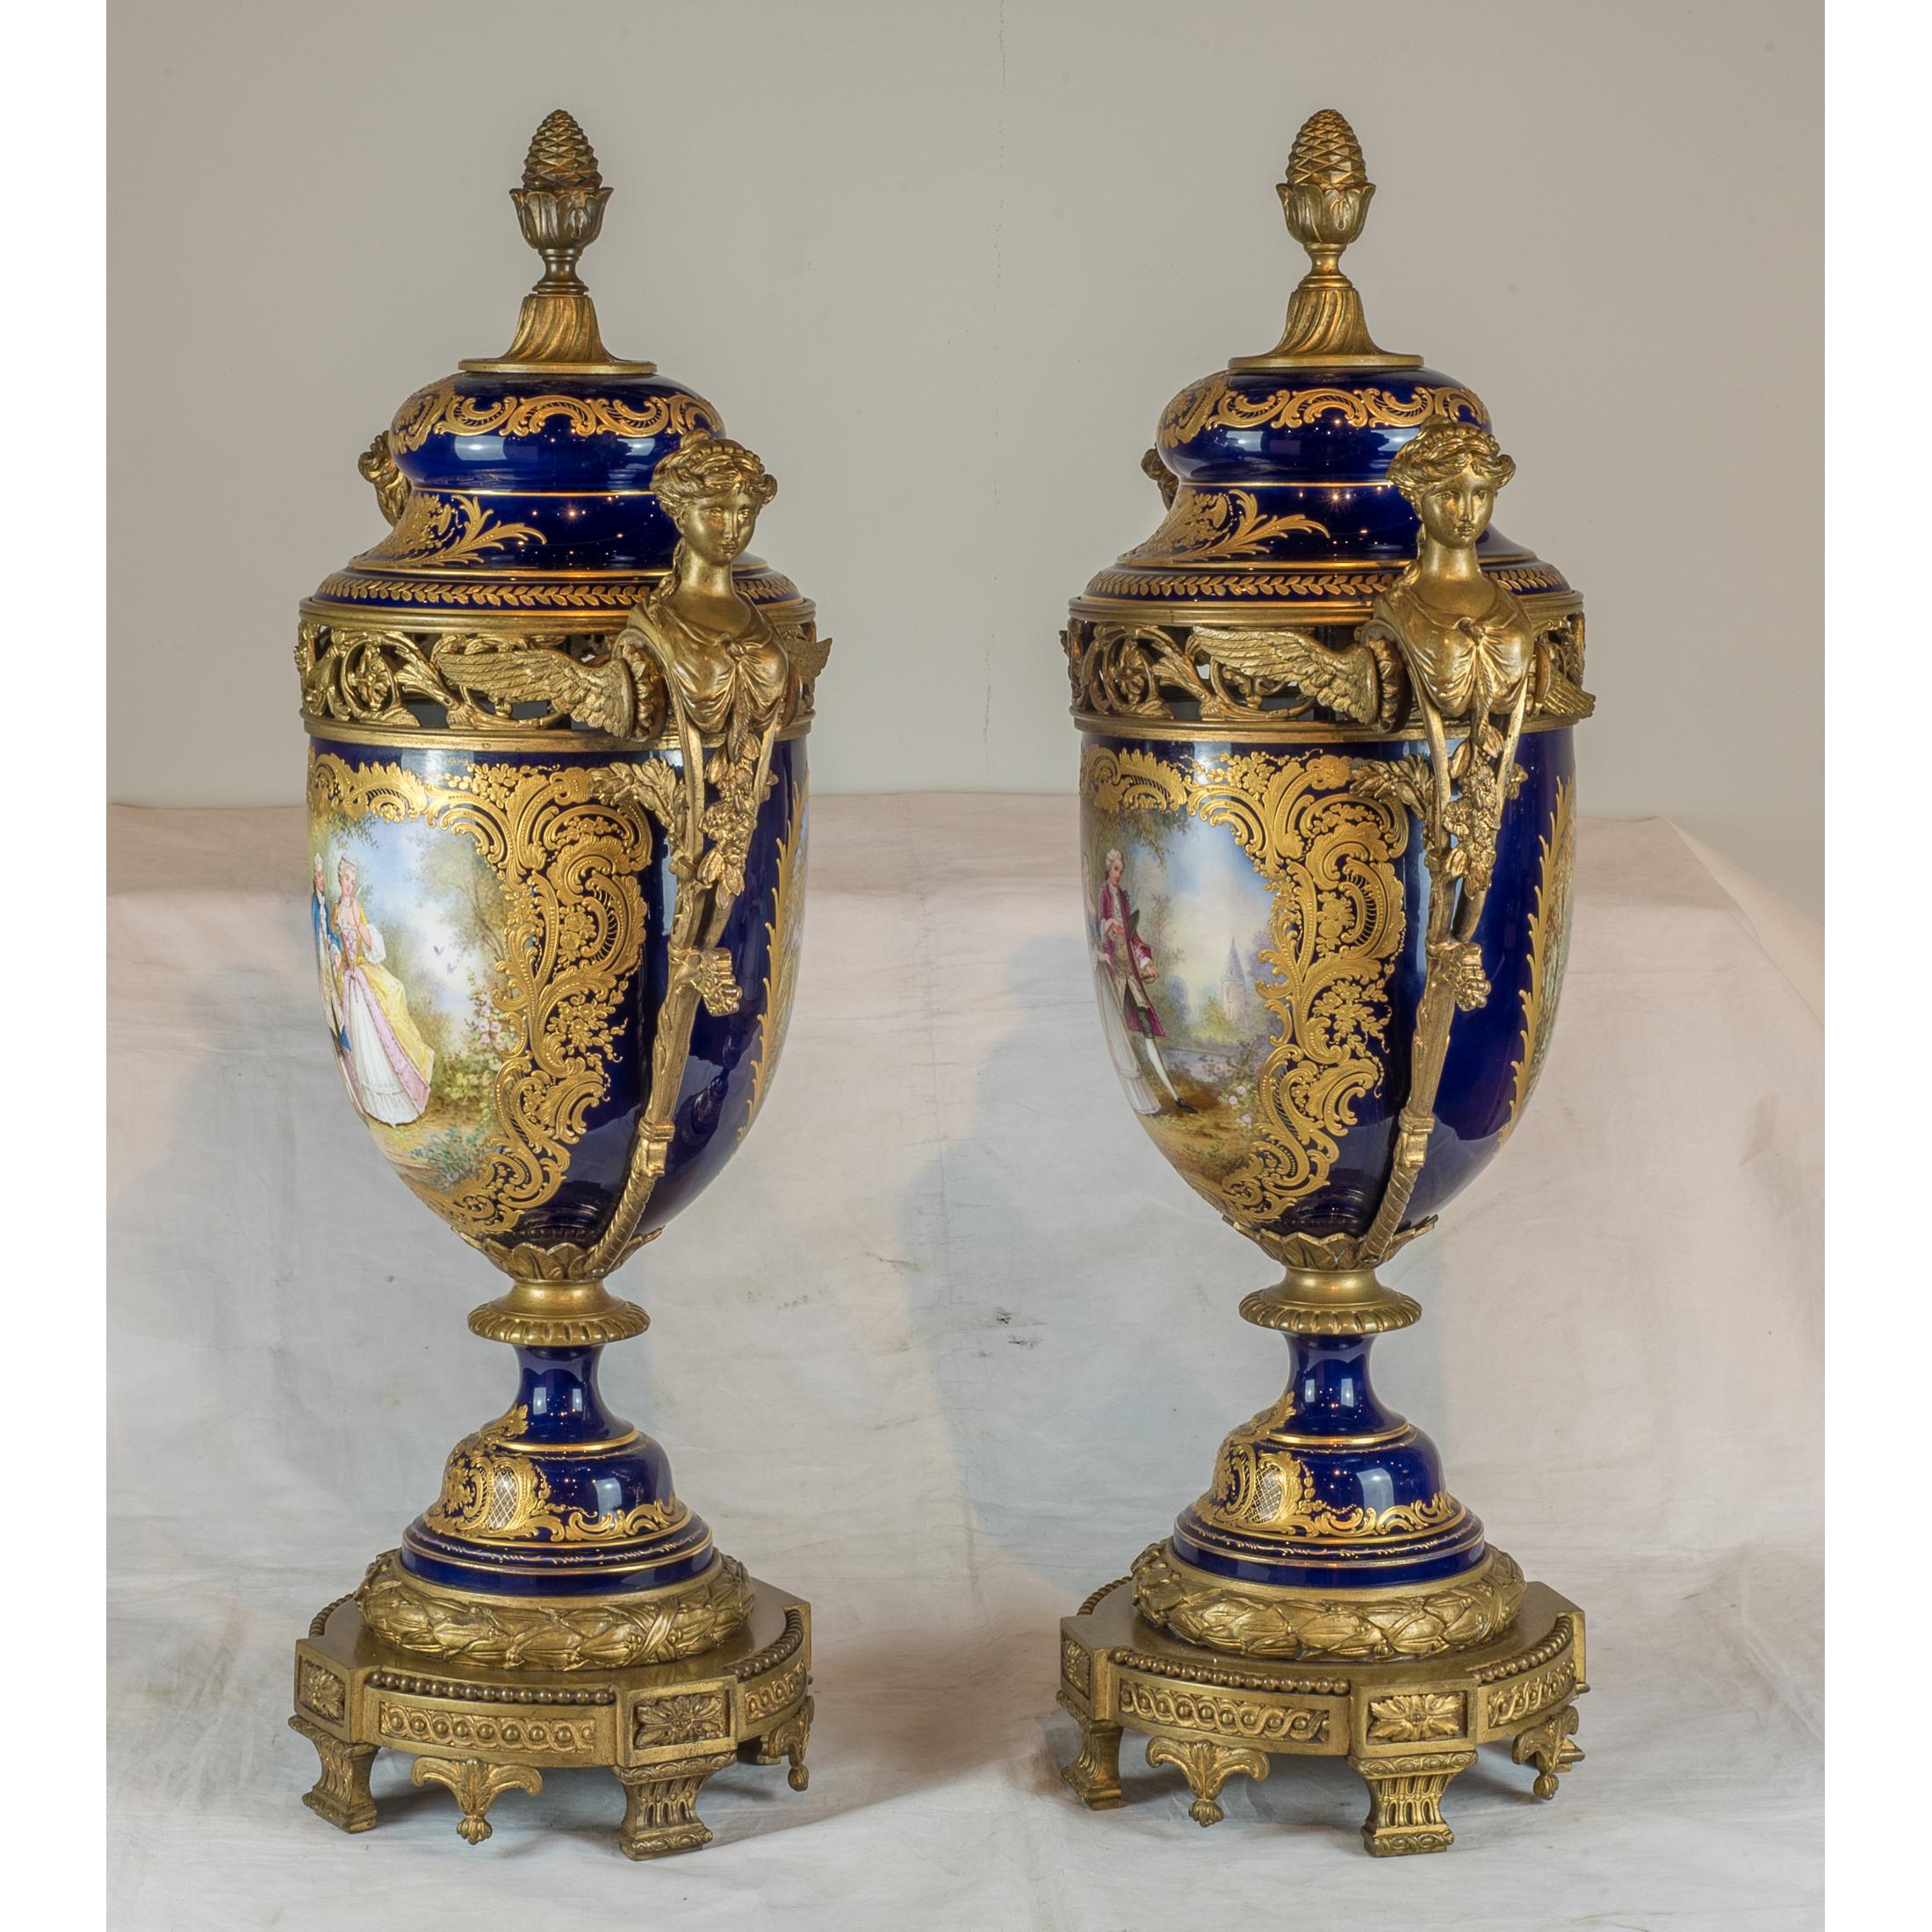 An exquisite Sèvres style bronze mounted and cobalt porcelain with hand painted courting figures in landscapes. 

Origin: French
Date: 19th century
Dimension: 29 in. x 13 in.